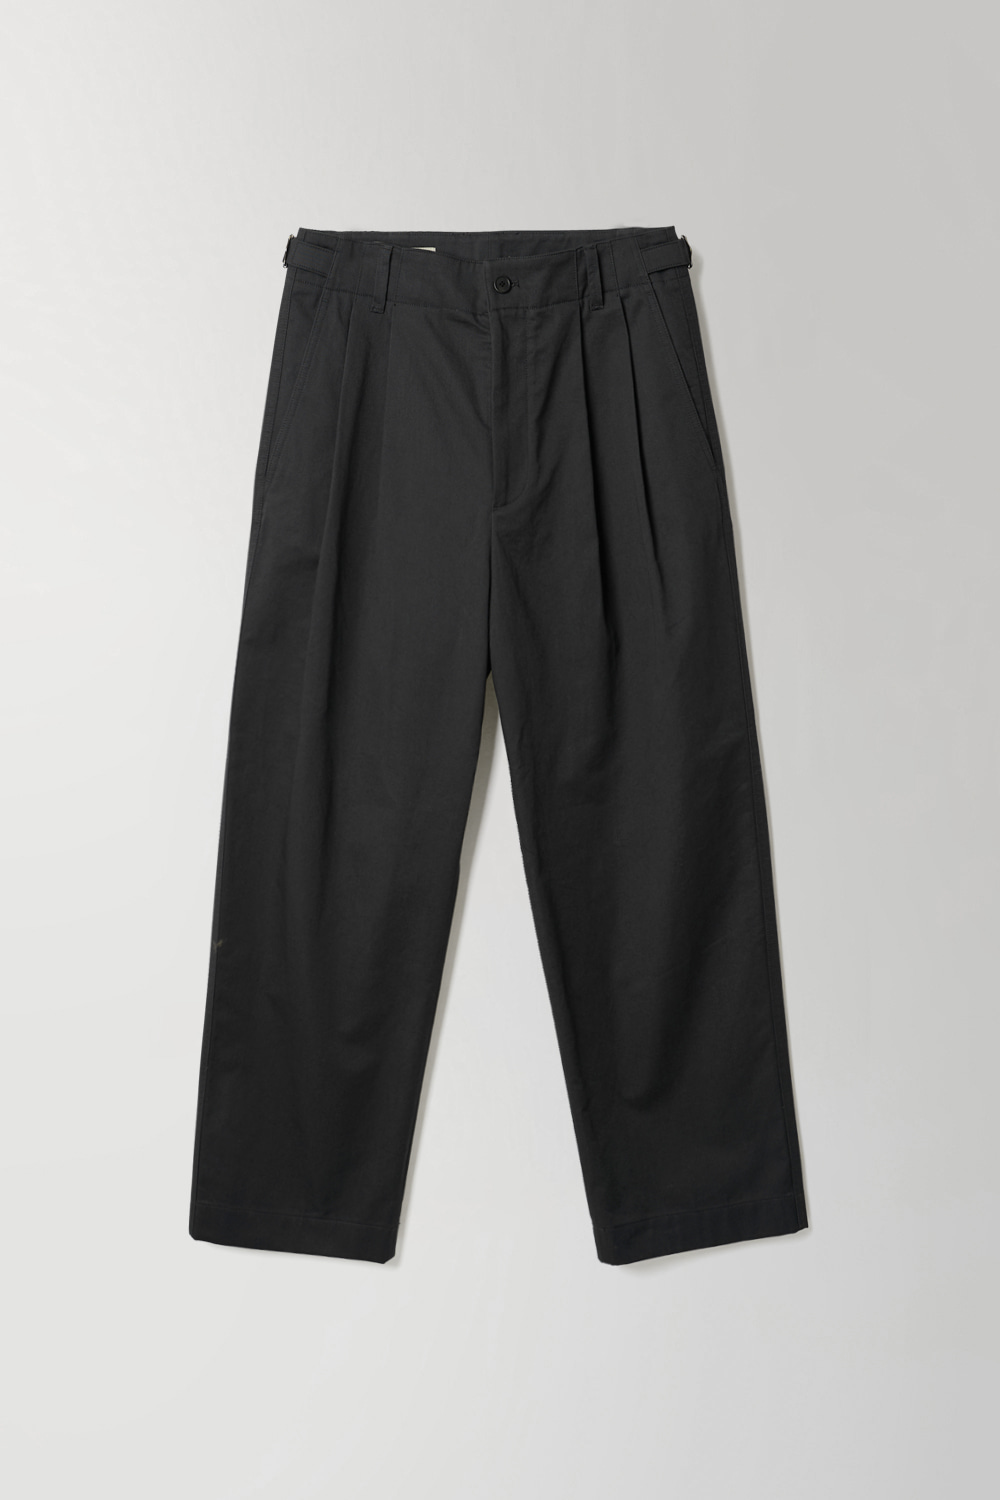 [3RD] TRAVELLER CHINO PANTS (TYPE1) - ANTHRACITE